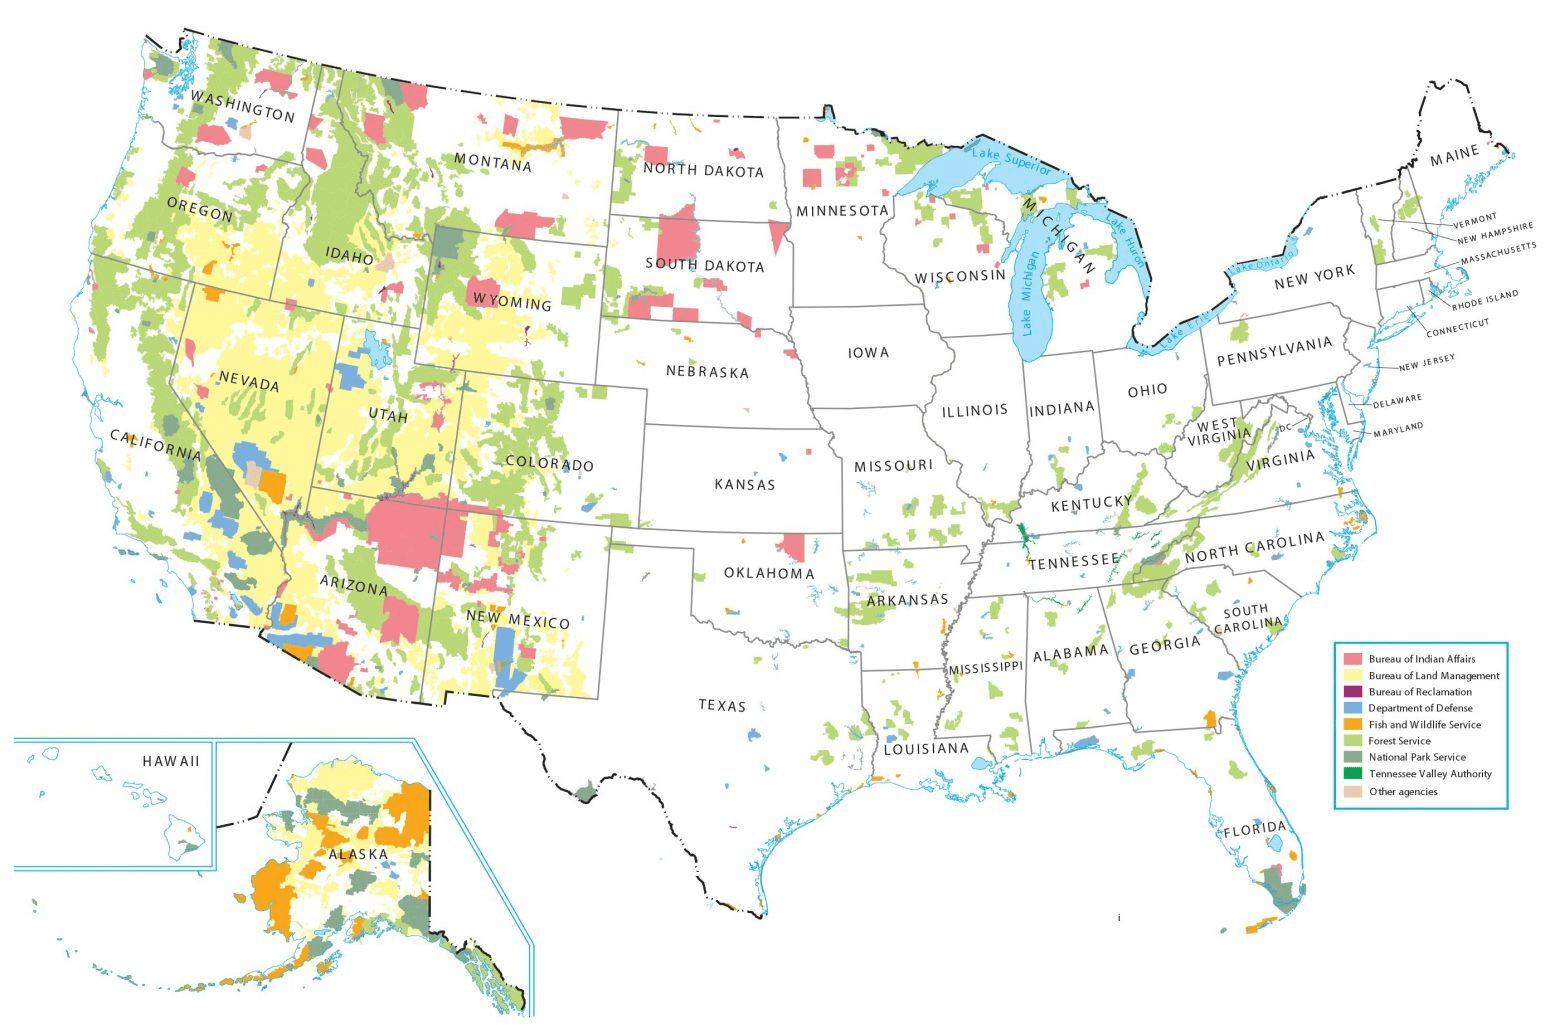 Map of the US showing various types of public lands